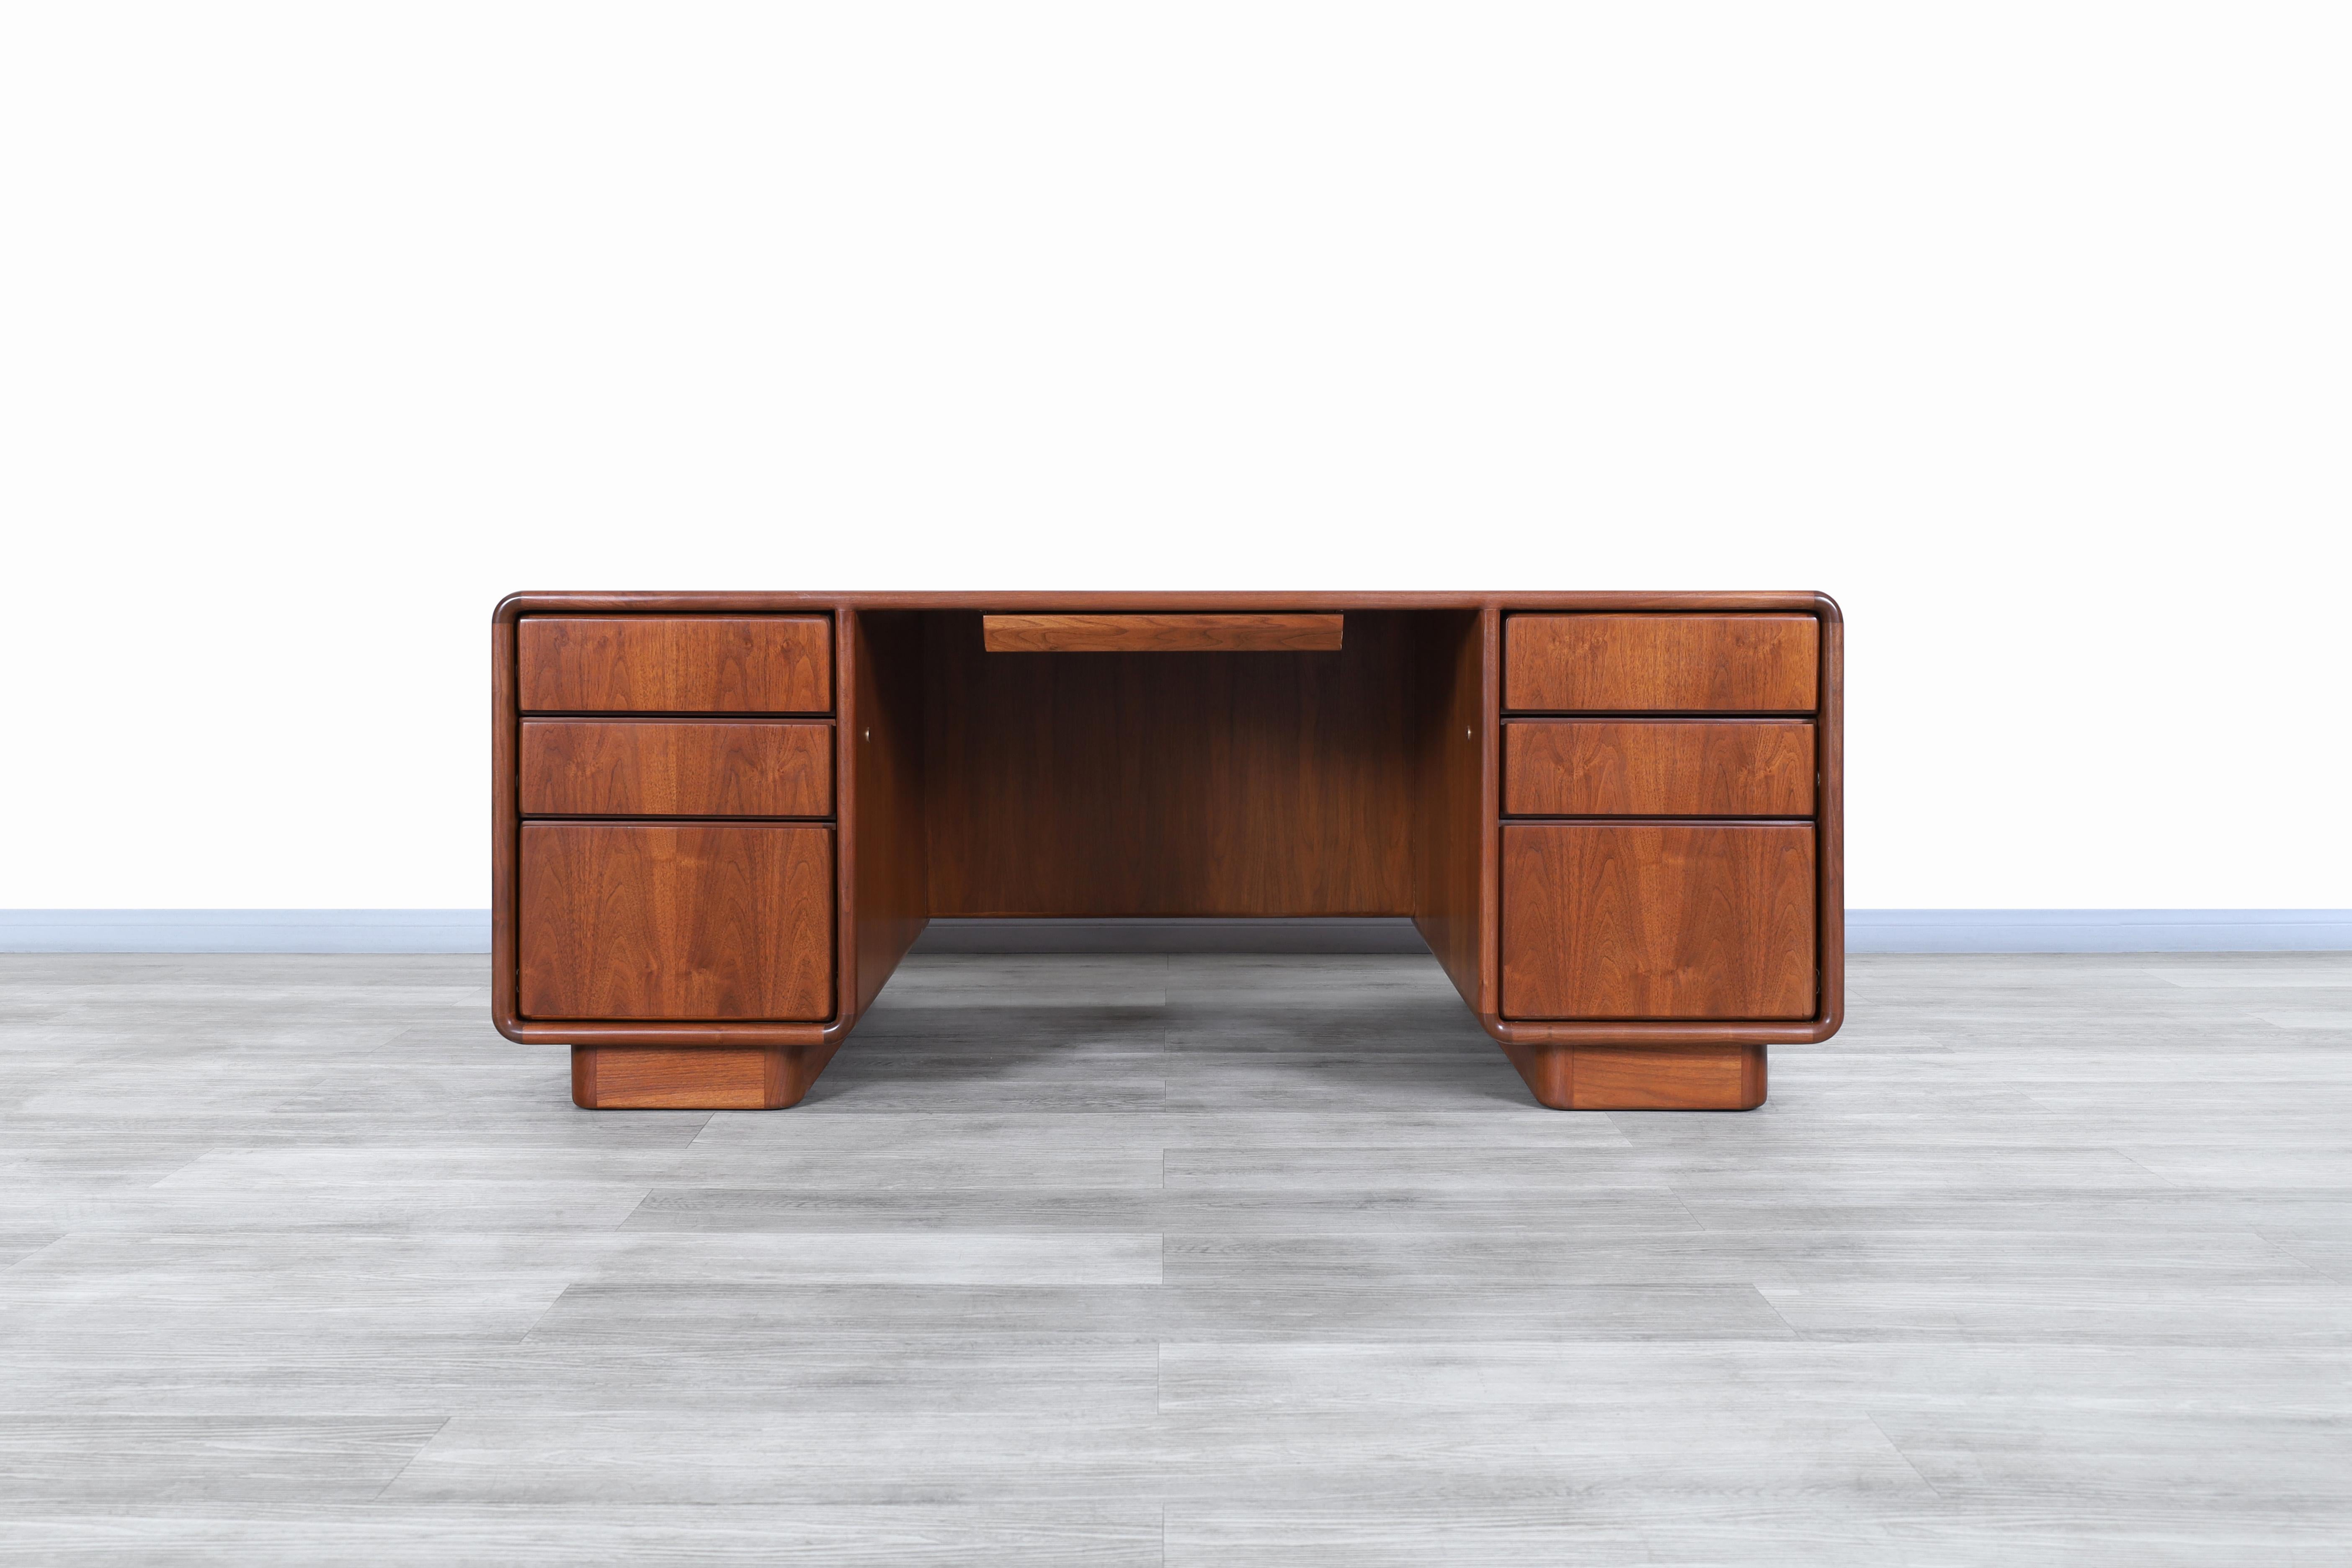 Exceptional Mid-Century Modern executive walnut desk manufactured and designed in the United States, circa 1950s. This desk has been built from the highest quality walnut wood and has a Minimalist but highly functional design where the construction